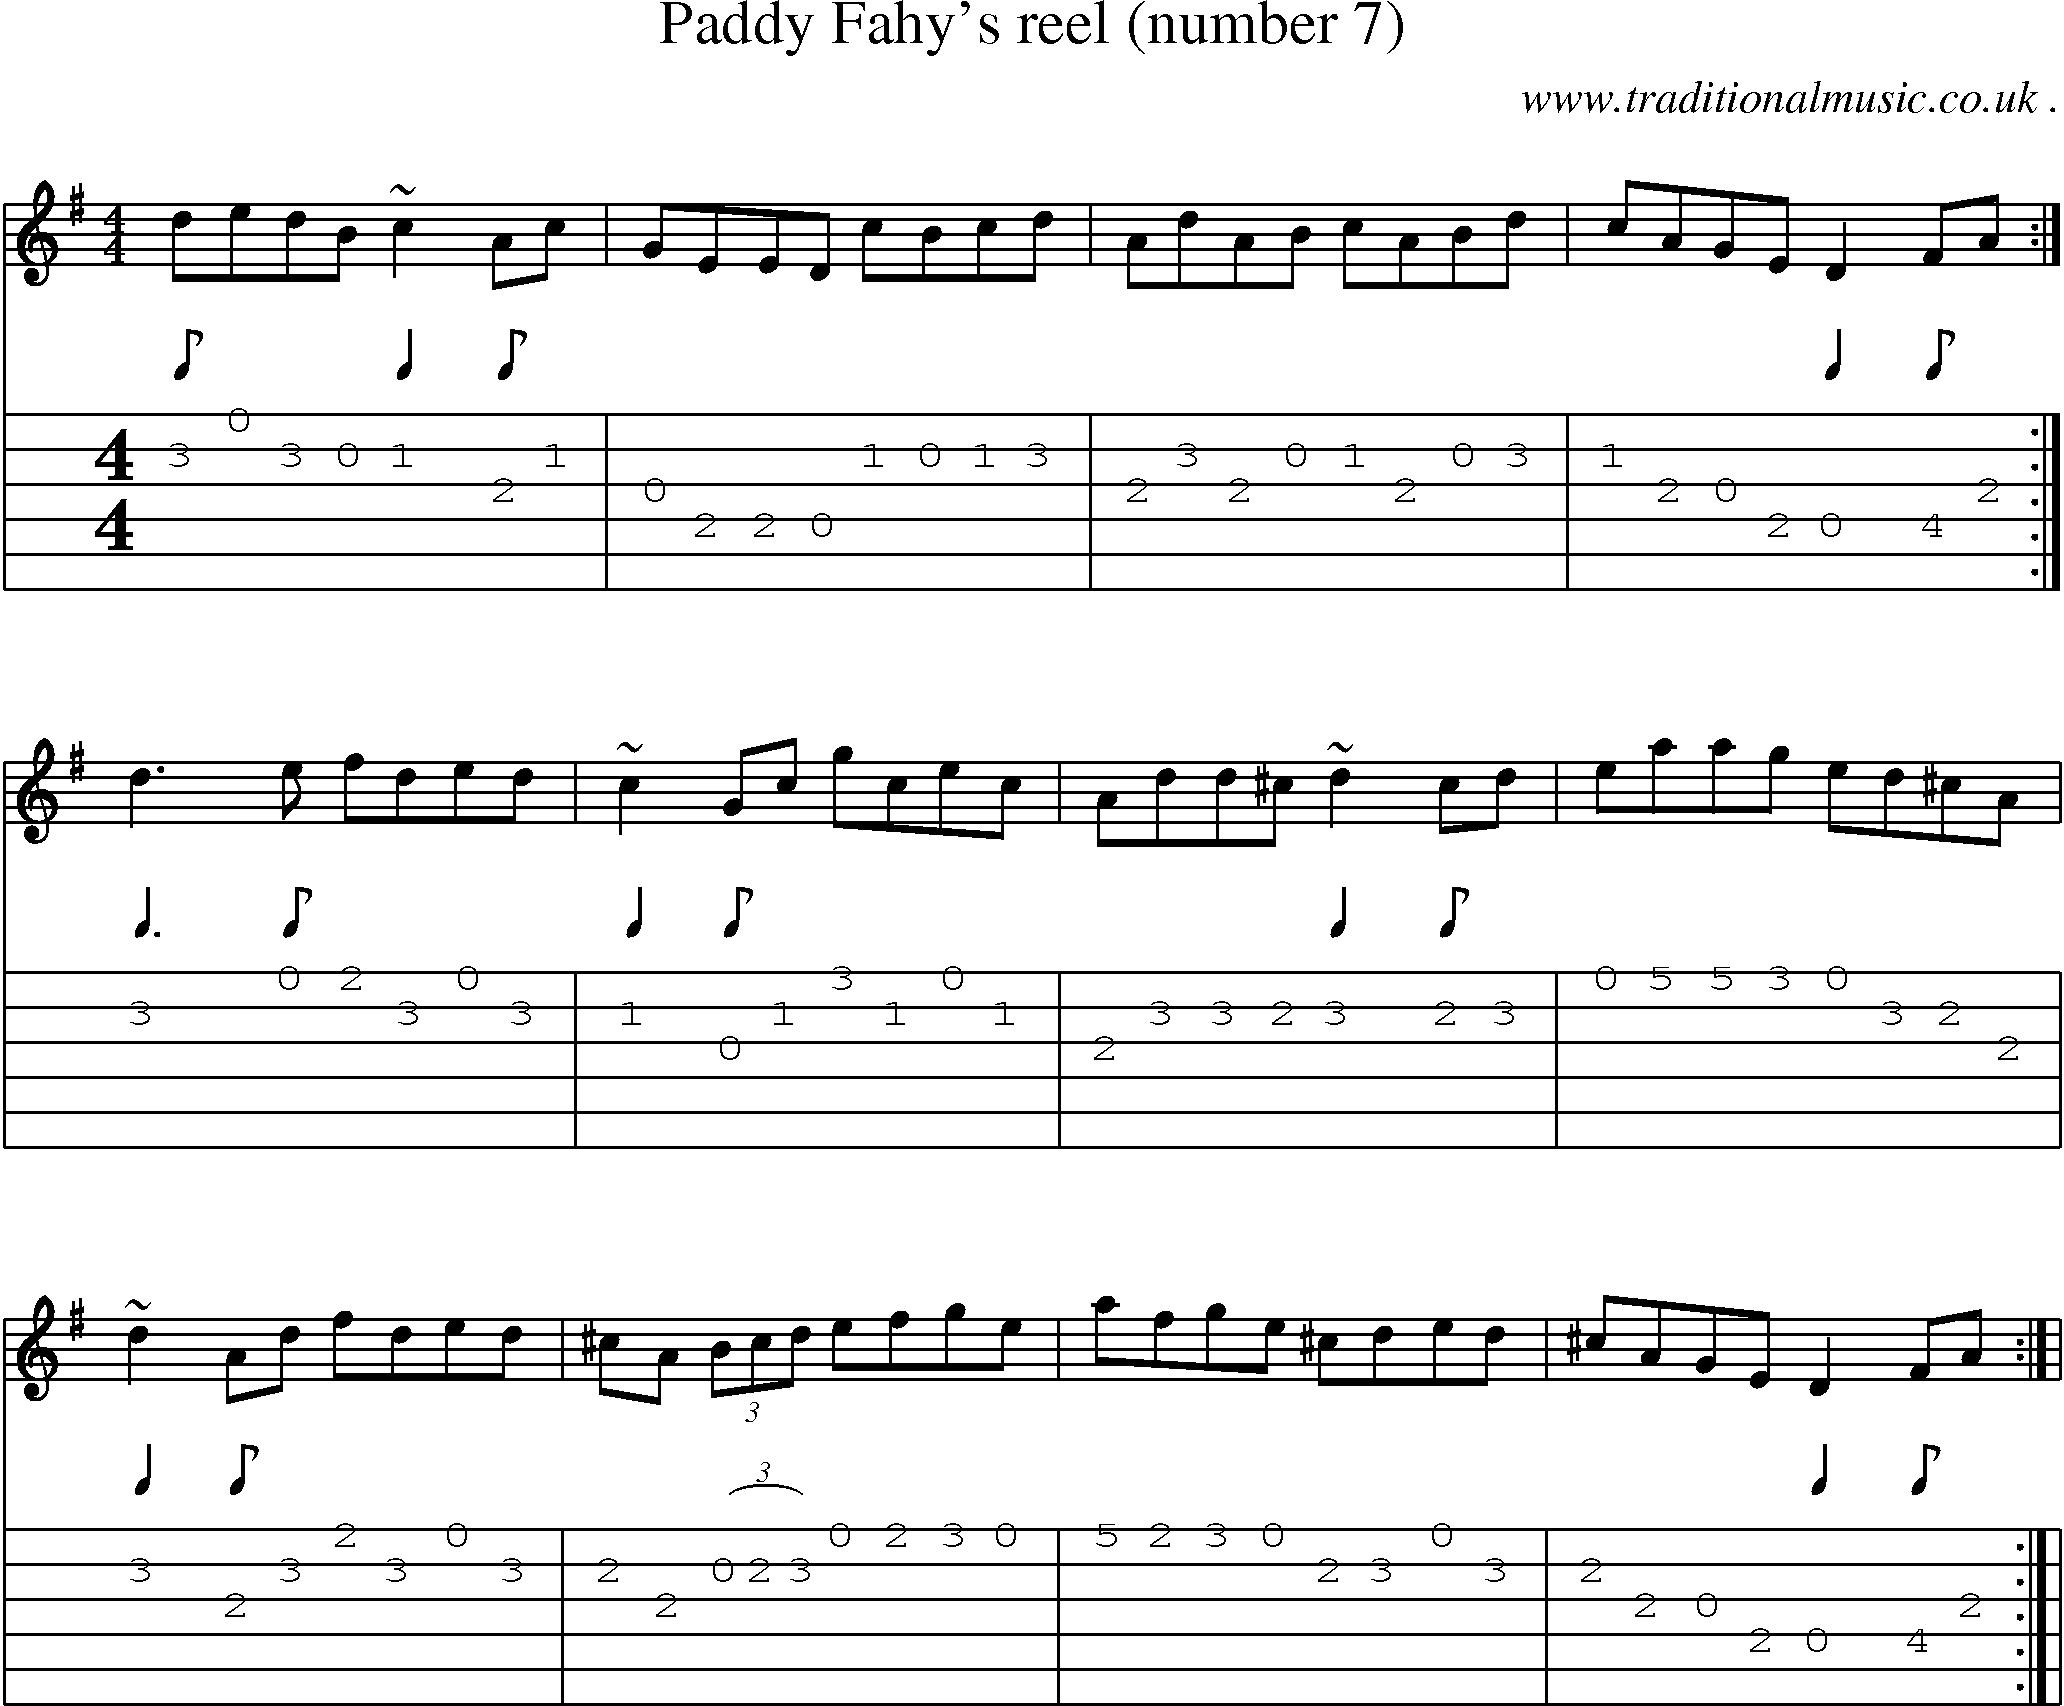 Sheet-music  score, Chords and Guitar Tabs for Paddy Fahys Reel Number 7